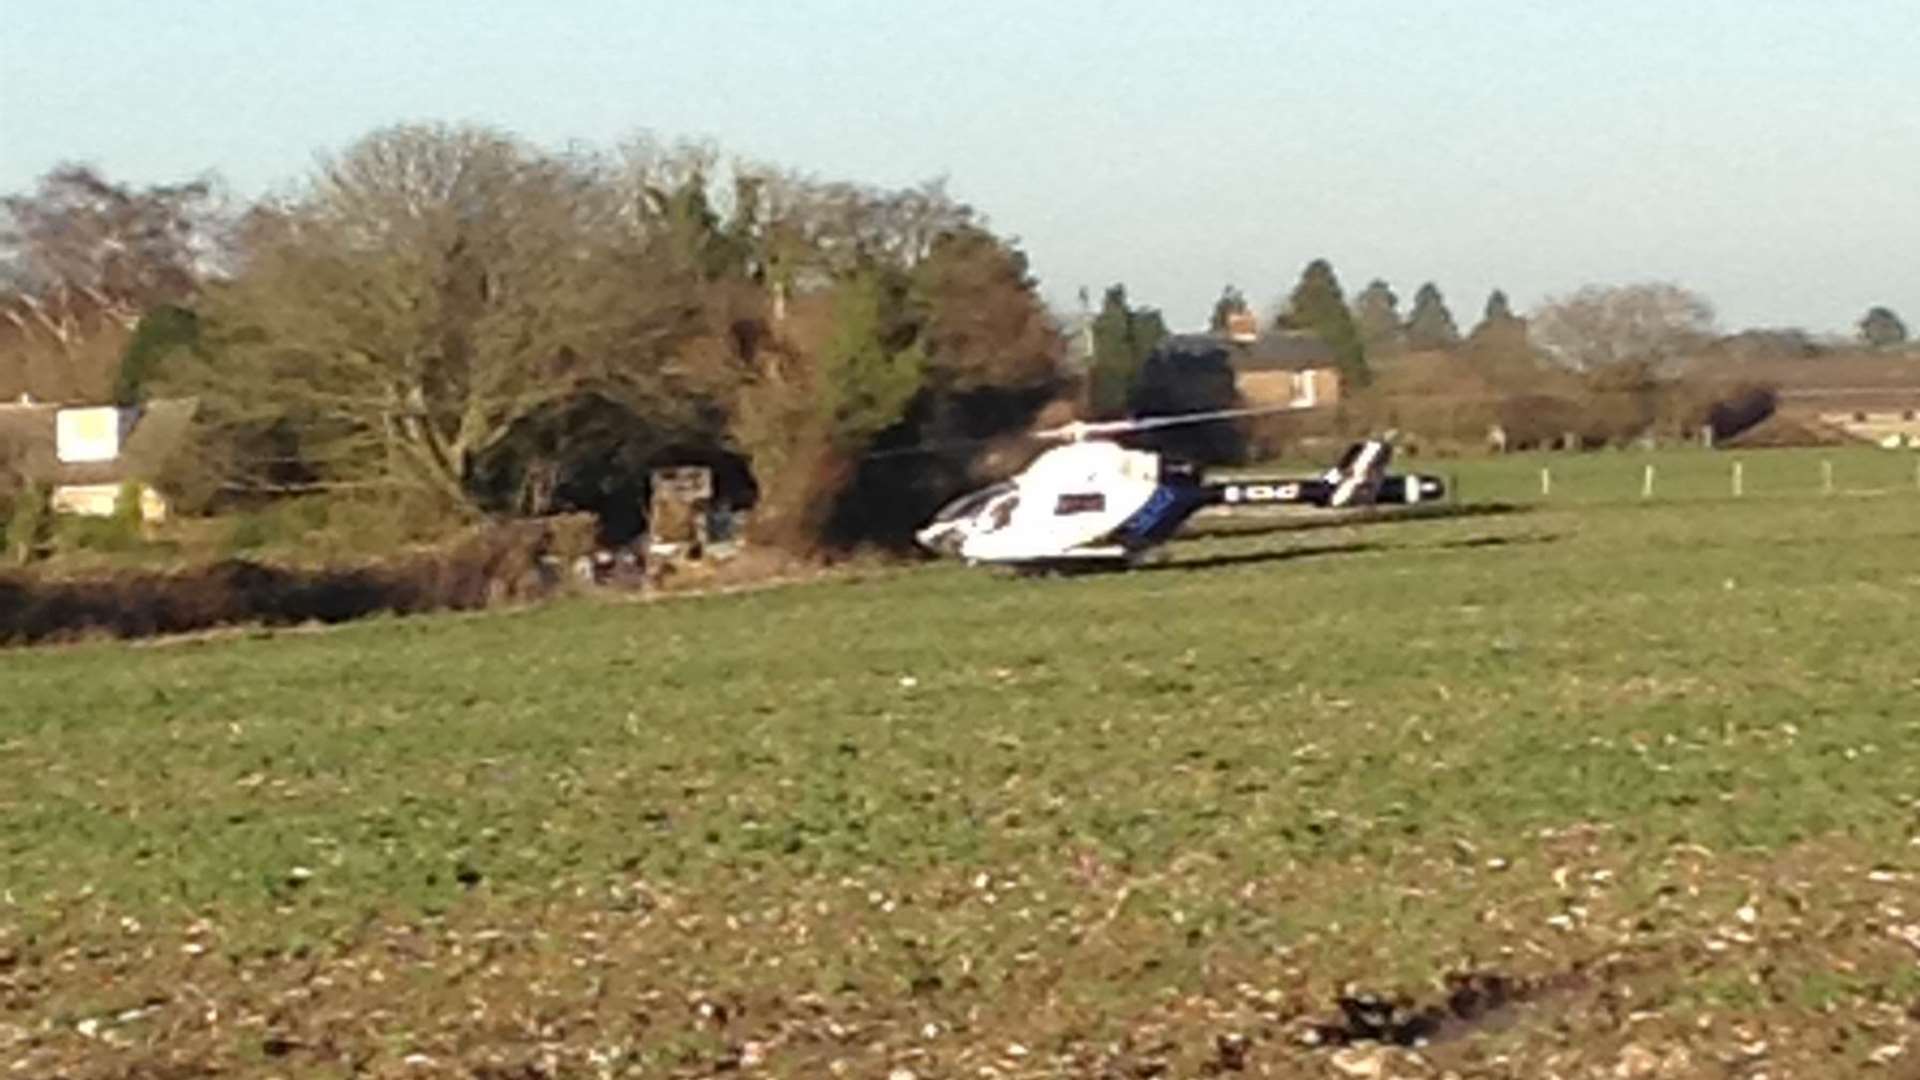 The air ambulance landed in Harvel